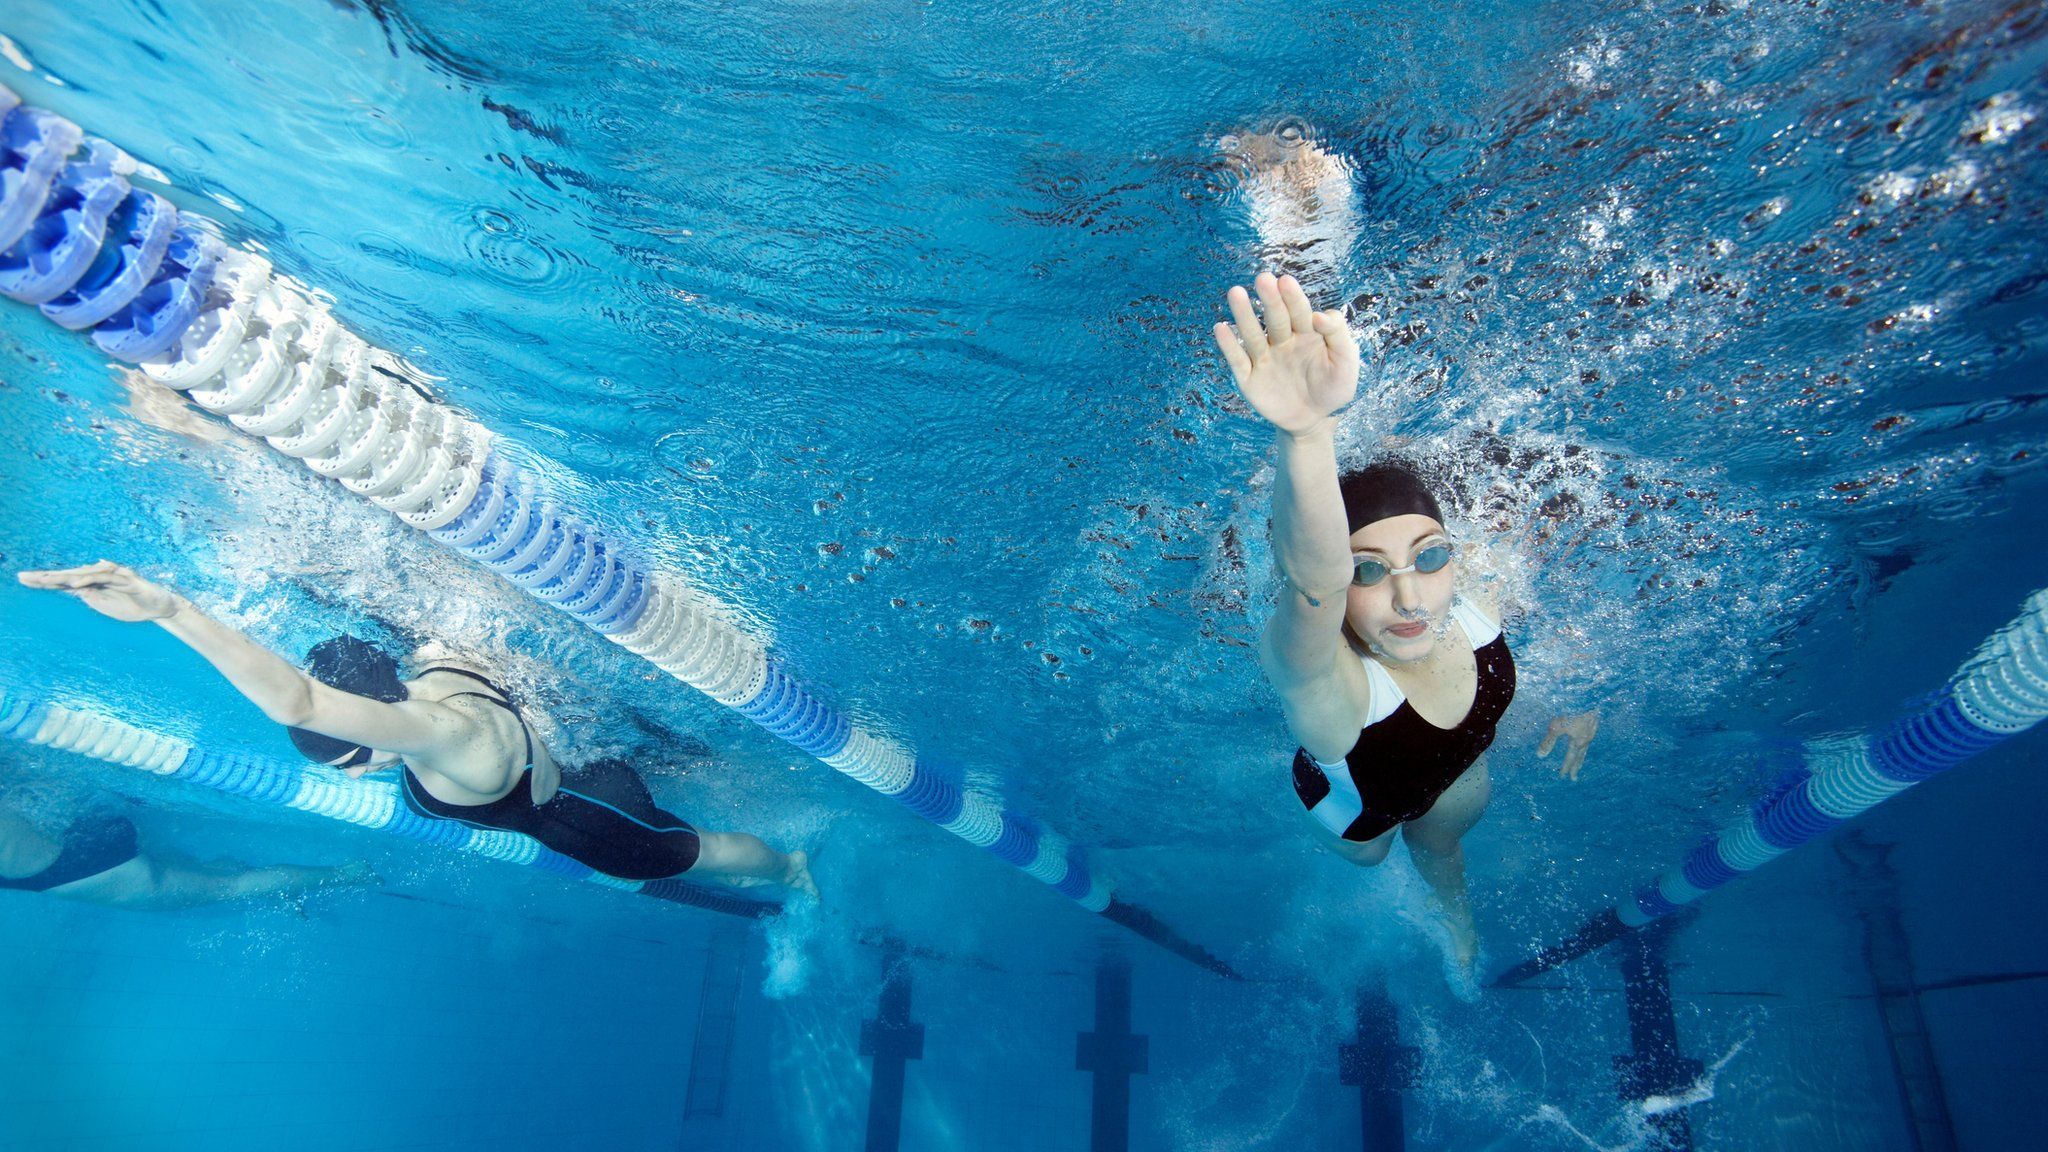 Stock image of people swimming in a swimming pool